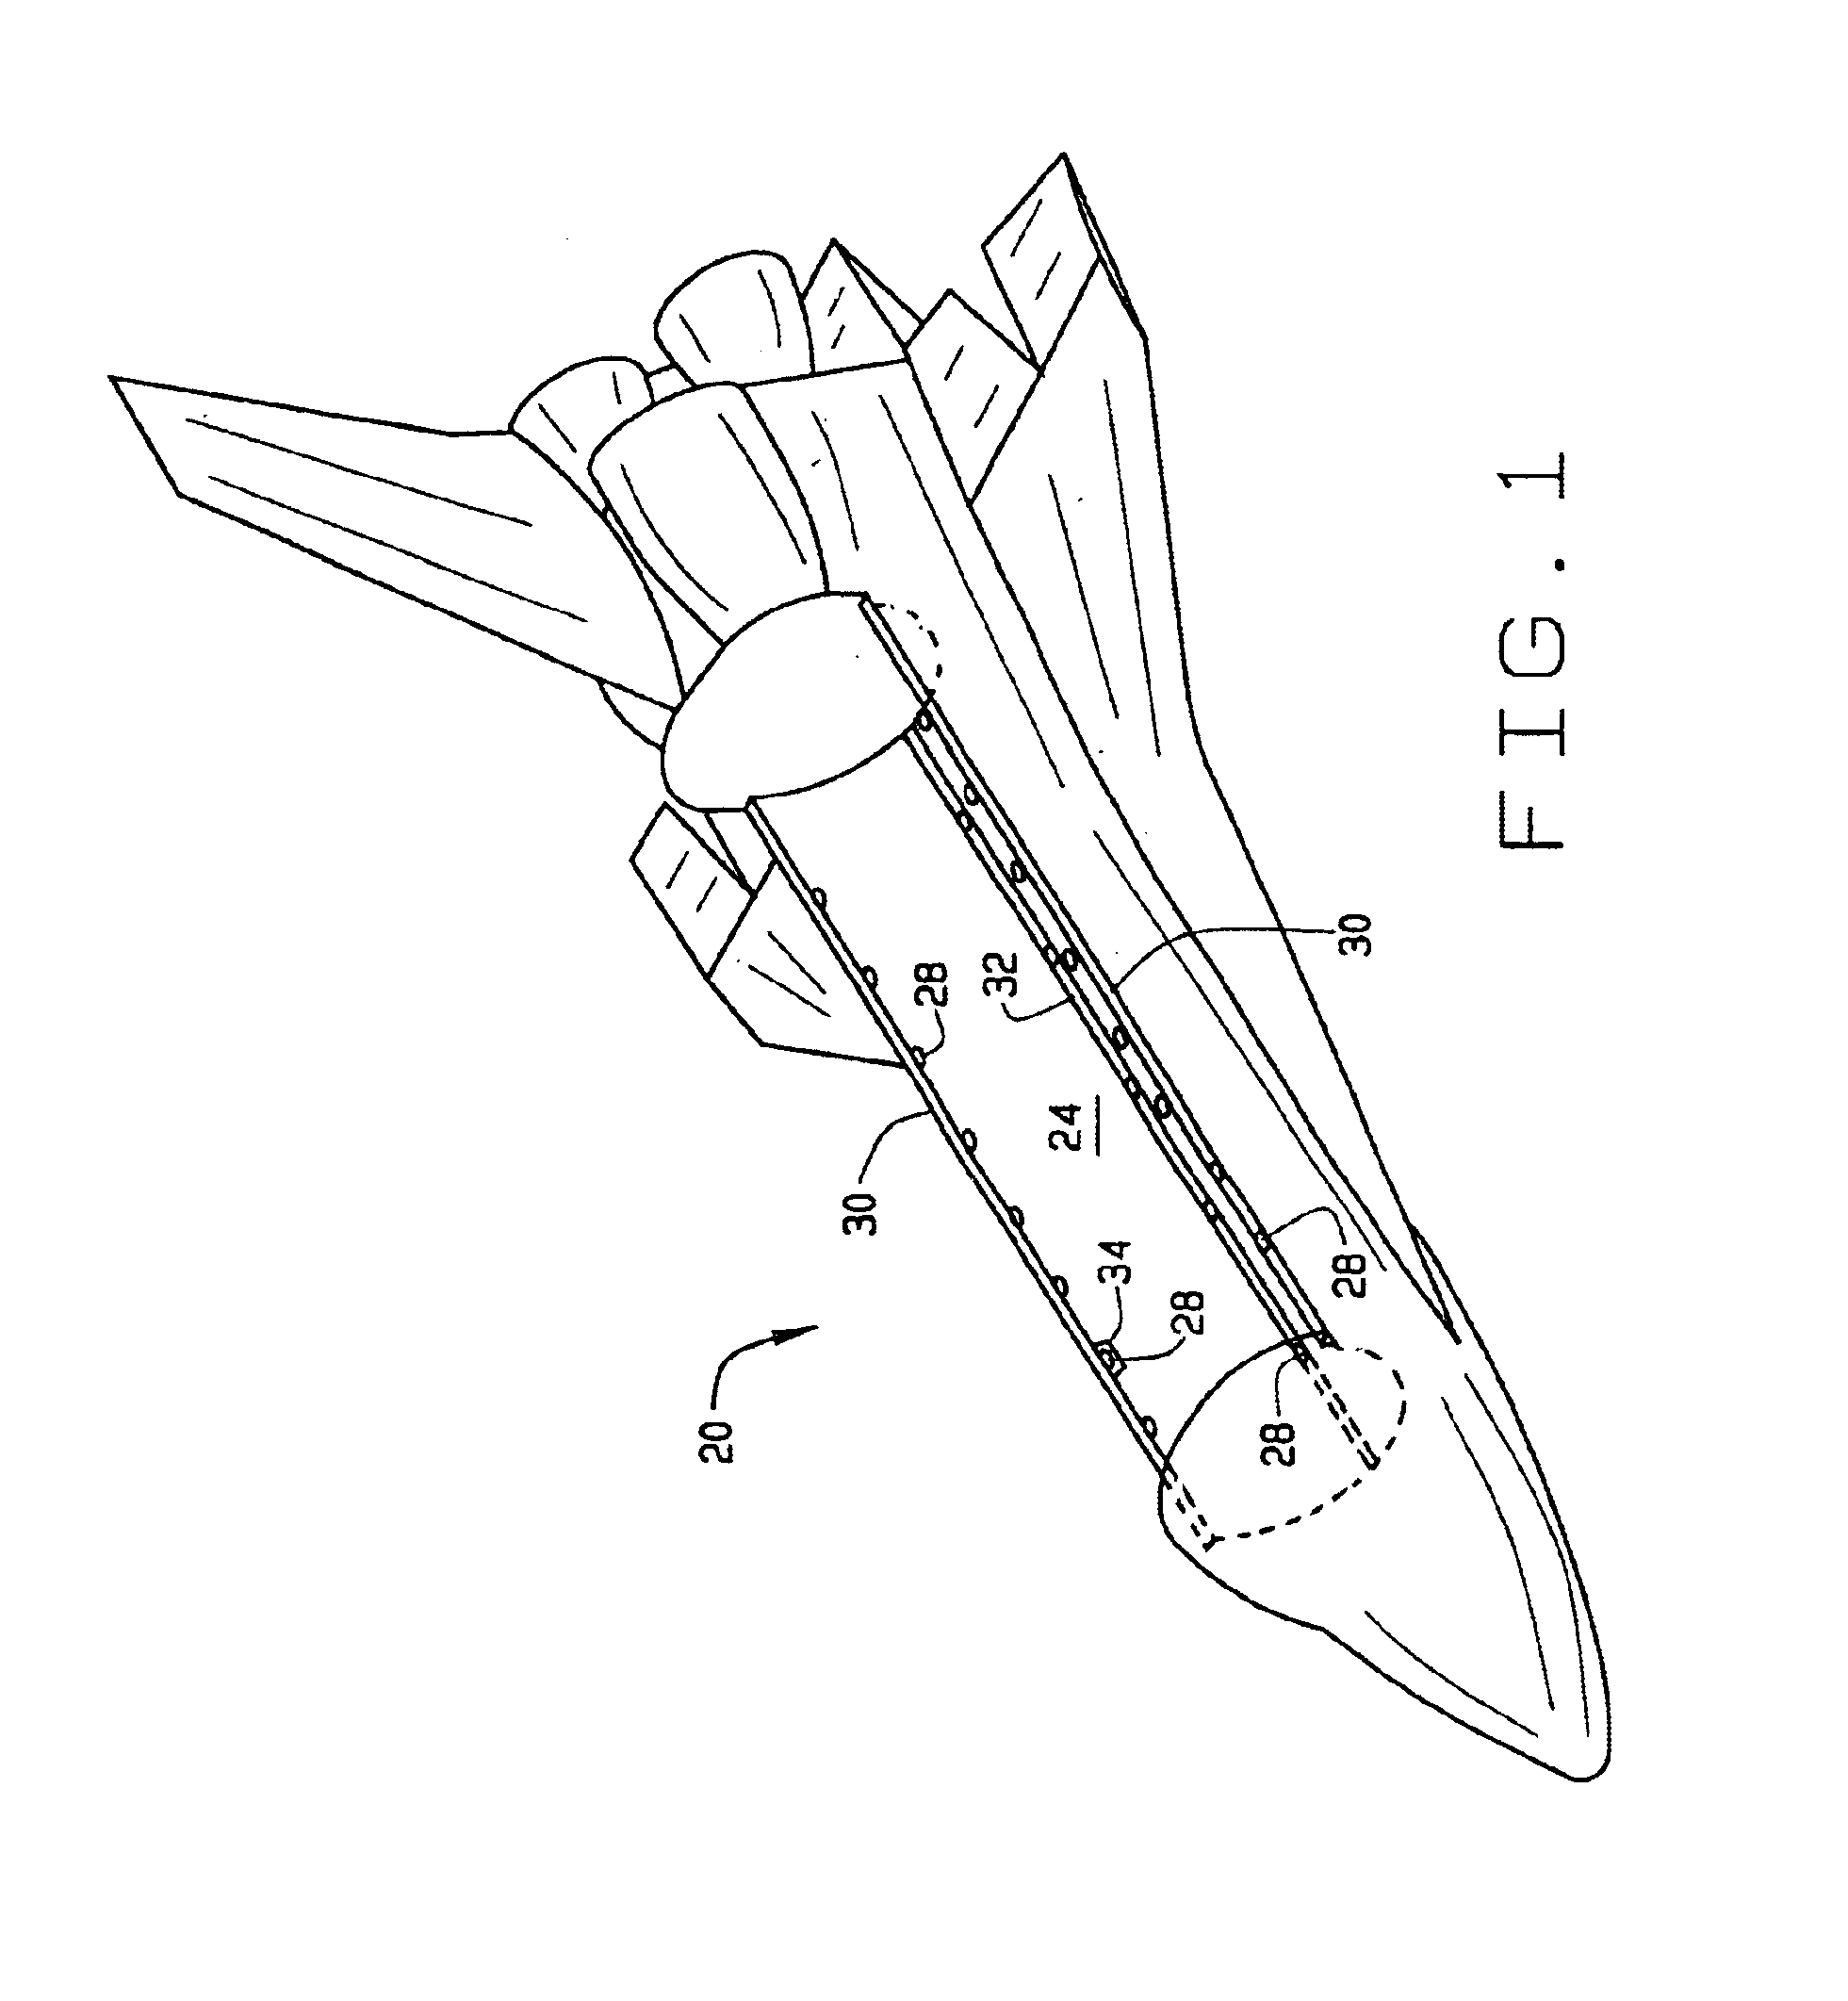 System and methods for integrating a payload with a launch vehicle